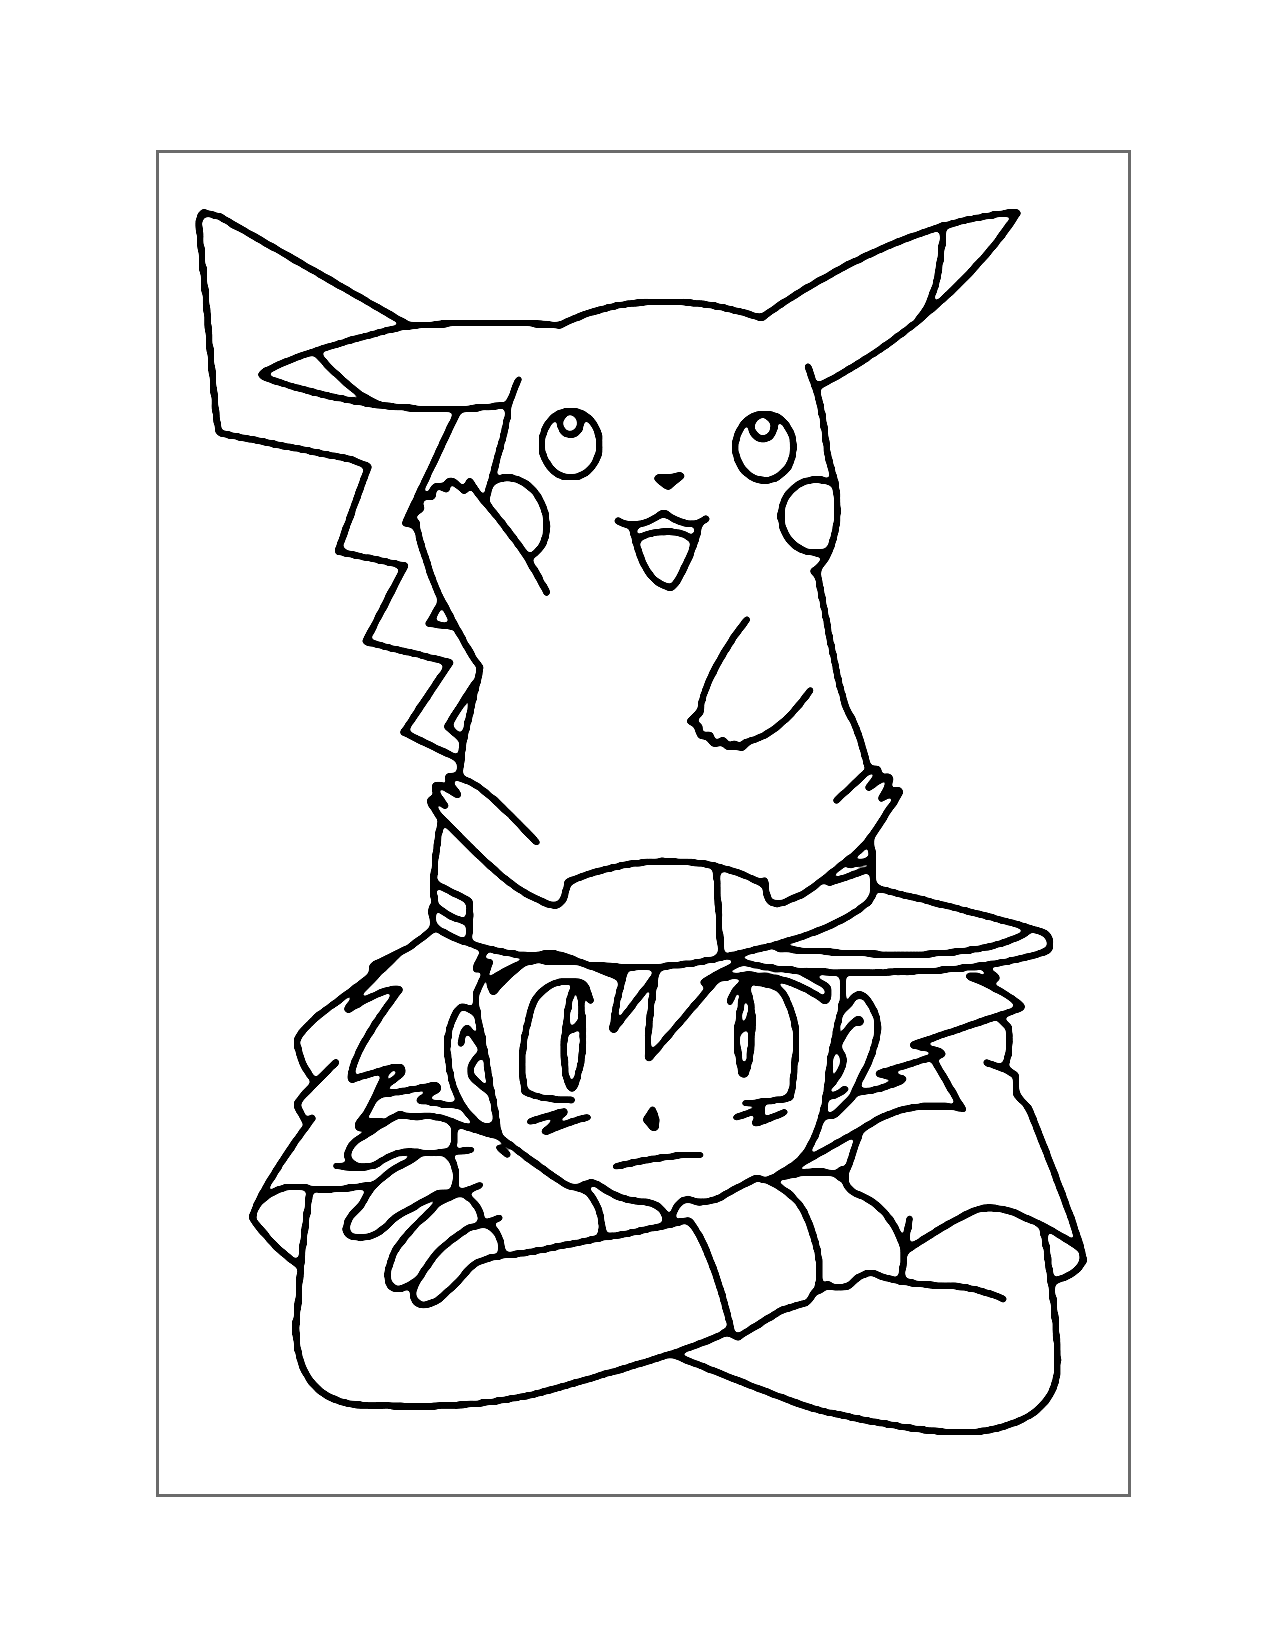 Fun Pikachu And Ash Coloring Page